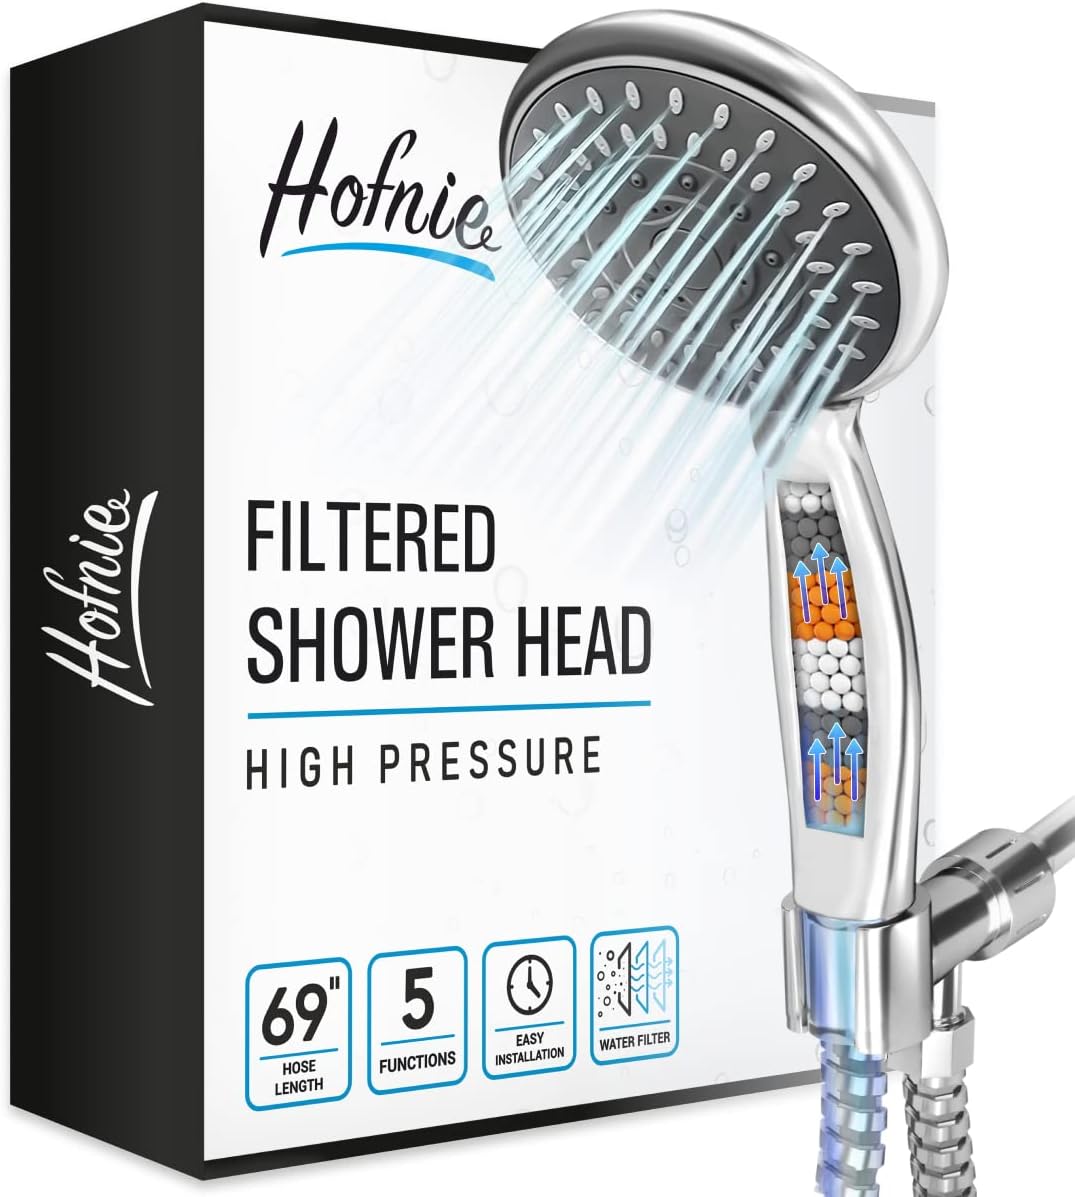 Filtered Shower Head with High Pressure, 5-Mode [...]